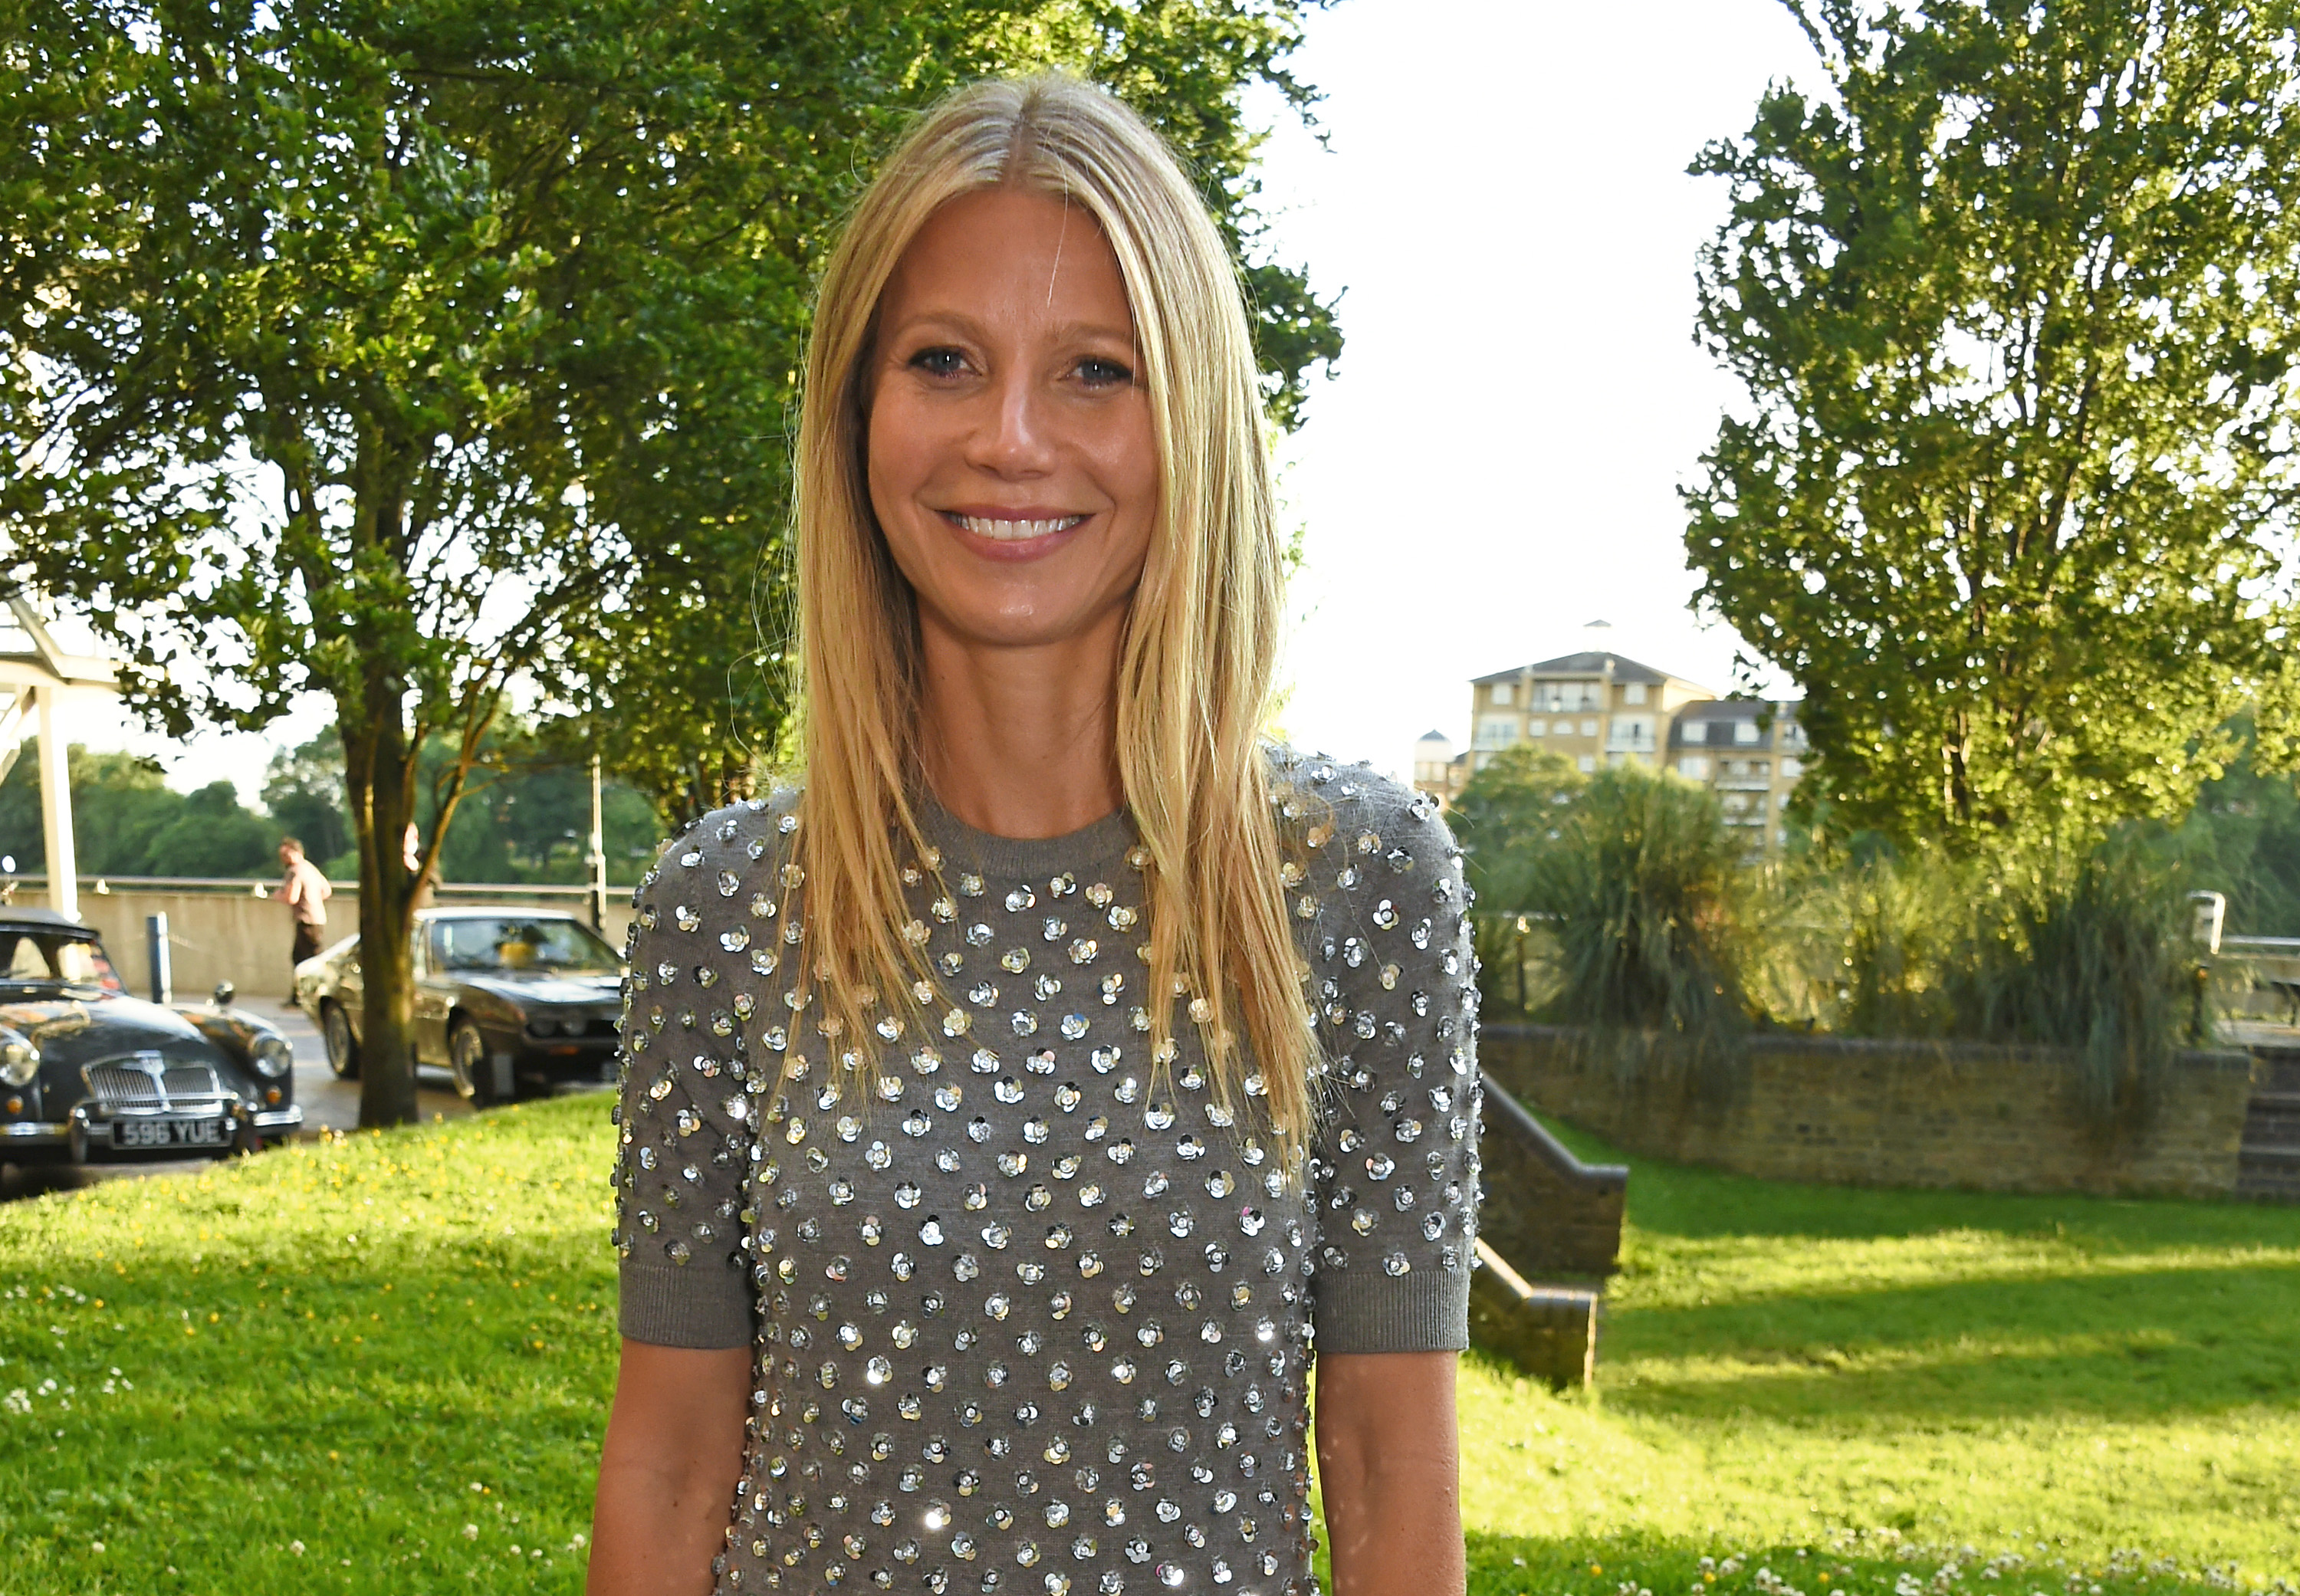 Gwyneth Paltrow attends a private dinner hosted by Michael Kors. (Dave Benett/Getty Images)